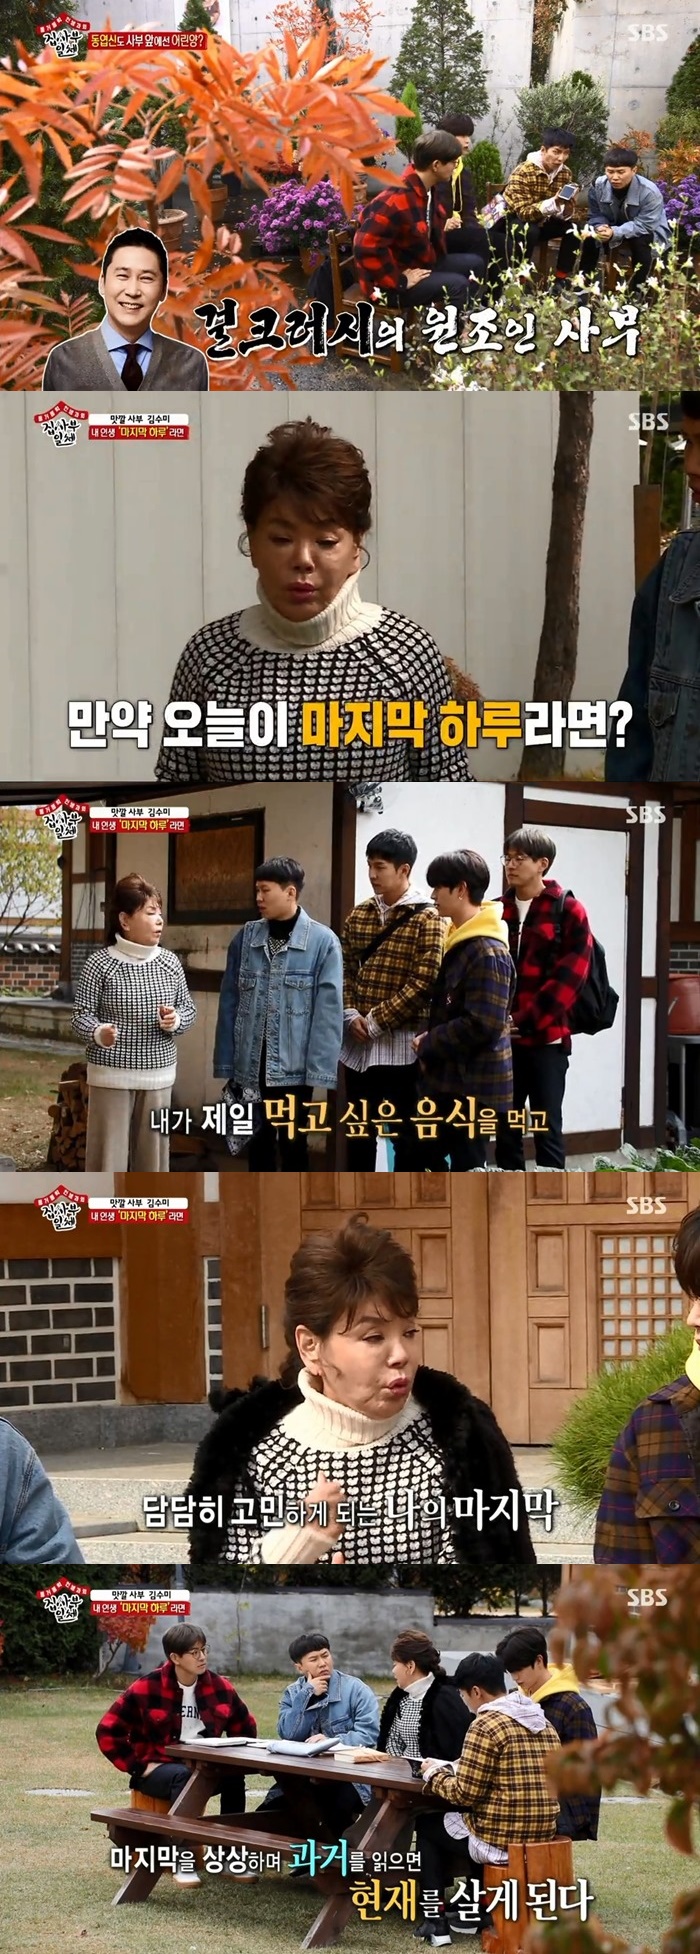 Members of SBS All The Butlers have had time to think about the last Haru of my life with Master Kim Soo-mi.According to Nielsen Korea, SBS All The Butlers Integrated, which was broadcast on the 18th (Sun), ranked first in the same time zone with 11.7% of households and 13.4% (the second part of the metropolitan area).KBS2 Happy Sunday - Superman is back, 10.6% for 1 night and 2 days, and only 5.3% for MBCs Hoongmin Husband.On this day, All The Butlers All attracted attention with the 2049 target audience rating of young viewers aged 20 to 49 reaching the top of the same time zone entertainment with 5.4%.On this day, Lee Seung-gi, Lee Sang-yoon, Yook Sungjae, and Yang Se-hyeong had time to unveil their life shot before going to meet the new master at the 21st.The members explained their life shot from Yang Se-hyeong, Lee Sang-yoon of Santiago, My boyfriend during the debut of Yook Sungjae, and Lee Seung-gi, who was recently taken at the shooting site in Morocco.The production team raised questions about the master by revealing why he asked for a life shot, saying, The master who met today asked me to take a picture that goes beyond the life shot you brought.Then, a hint fairy connected the phone call with the comedian Shin Dong-yup, who said of the master, It is the aid of Girl Crush.He is a man who talks 39 gold over 19 gold, he said. He is good at swearing and likes flowers. He and Sang-yoon may cry.The members noticed the identity of the master to some extent and moved on.According to the advice of Shin Dong-yup, the members who prepared the bouquet faced Kim Soo-mi, the master of the day who is making rice while listening to the classic in front of the cauldron on the back of the hanok.Kim Soo-mi, who overpowered the members with charisma from the beginning, revealed why he invited the members of All The Butlers to the Hanok house.O-nu-ri last Haru wanted to sleep in a hanok. The master said, As is born, death is not my will. I am already 70 years old.I see the future. Think of it as the last of your days.I want to eat the food I want to eat the most if I am the last Haru of O-nu-ri and give all the answers to the questions you are curious about. The members who had a meaningful story about life and death in five minutes after meeting fell into deep thought, pondering the question of the master, How to live the last Haru of O-nu-ri life and the suggestion to send the last Haru of the imaginary life.Kim Soo-mi also released a diary that has been written every day since Middle school.Kim Soo-mi said, I saw my colleagues die two years ago and my best friend died last year. I definitely die. I was worried about my last.At that time, I read the diary of my youth. Kim Soo-mi explained that diary is a letter I write to me in the future of youth, and advised members to develop their diary habits.Kim Soo-mi also went to dinner with members of the delicious sesame leaf kimchi, par kimchi, and mucheong kimchi prepared by himself, saying, If the last Haru of life is steamed sweet potato, I will eat kimchi.Kim Soo-mi shared memories of his father, who said, I think of my father, he said, I sold my sweet potato field and sent me to a middle school in Seoul.When Lee Seung-gi asked, What will you do after eating rice? Kim Soo-mi said, You take a picture of the spirit.I want to take a picture of a portrait that can not be seen anywhere. Kim Soo-mi said, I am not a general portrait, but I will take it beautifully.Its cool, he said.Kim Soo-mi asked the members to take a picture of Youngjeong, which is nowhere in the world after moving to a beautiful park with maple leaves.Kim Soo-mi emphasized, I will use my photo today as my portrait photo, so I can laugh while I am mourning with Feelings.Kim Soo-mi also painted his future funeral, saying, When the bonus goes out, the song is also heard, but I want you to dance and send it.Are you really writing (in portraits)? I got a big mission, Yook Sungjae told Kim Soo-mi, because its real.I do not like the death of my age, but I want to accept it.I was a unique actor, so I want to be consistent until the end. Please give up the idea of ​​a portrait. Lee Seung-gi was luxury, Lee Sang-yoon was elegant, Yang Se-hyeong was blue, and Yook Sungjae was sexy. The members took their own concept and started taking Kim Soo-mi portrait.Kim Soo-mi was a heavenly actor; Kim Soo-mi, who prepared perfectly for costumes and props, took pictures in various ways, from indifferentness and delight to delightful charm.Kim Soo-mi laughed when Lee Sang-yoon saw a picture of himself and expressed I think Im going to hell.Furthermore, he added, I want to live a little more. He also conveyed another sincerity to viewers about the meaning of death. On the other hand, the members challenged the life shot on this day.Lee Seung-gi emphasized good, Lee Sang-yoon Ju Yunbal, Yang Se-hyeong hip Feelings and Yook Sungjae mystery.Living with the Living Life Tutor - All The Butlers is broadcast every Sunday at 6:25 pm.